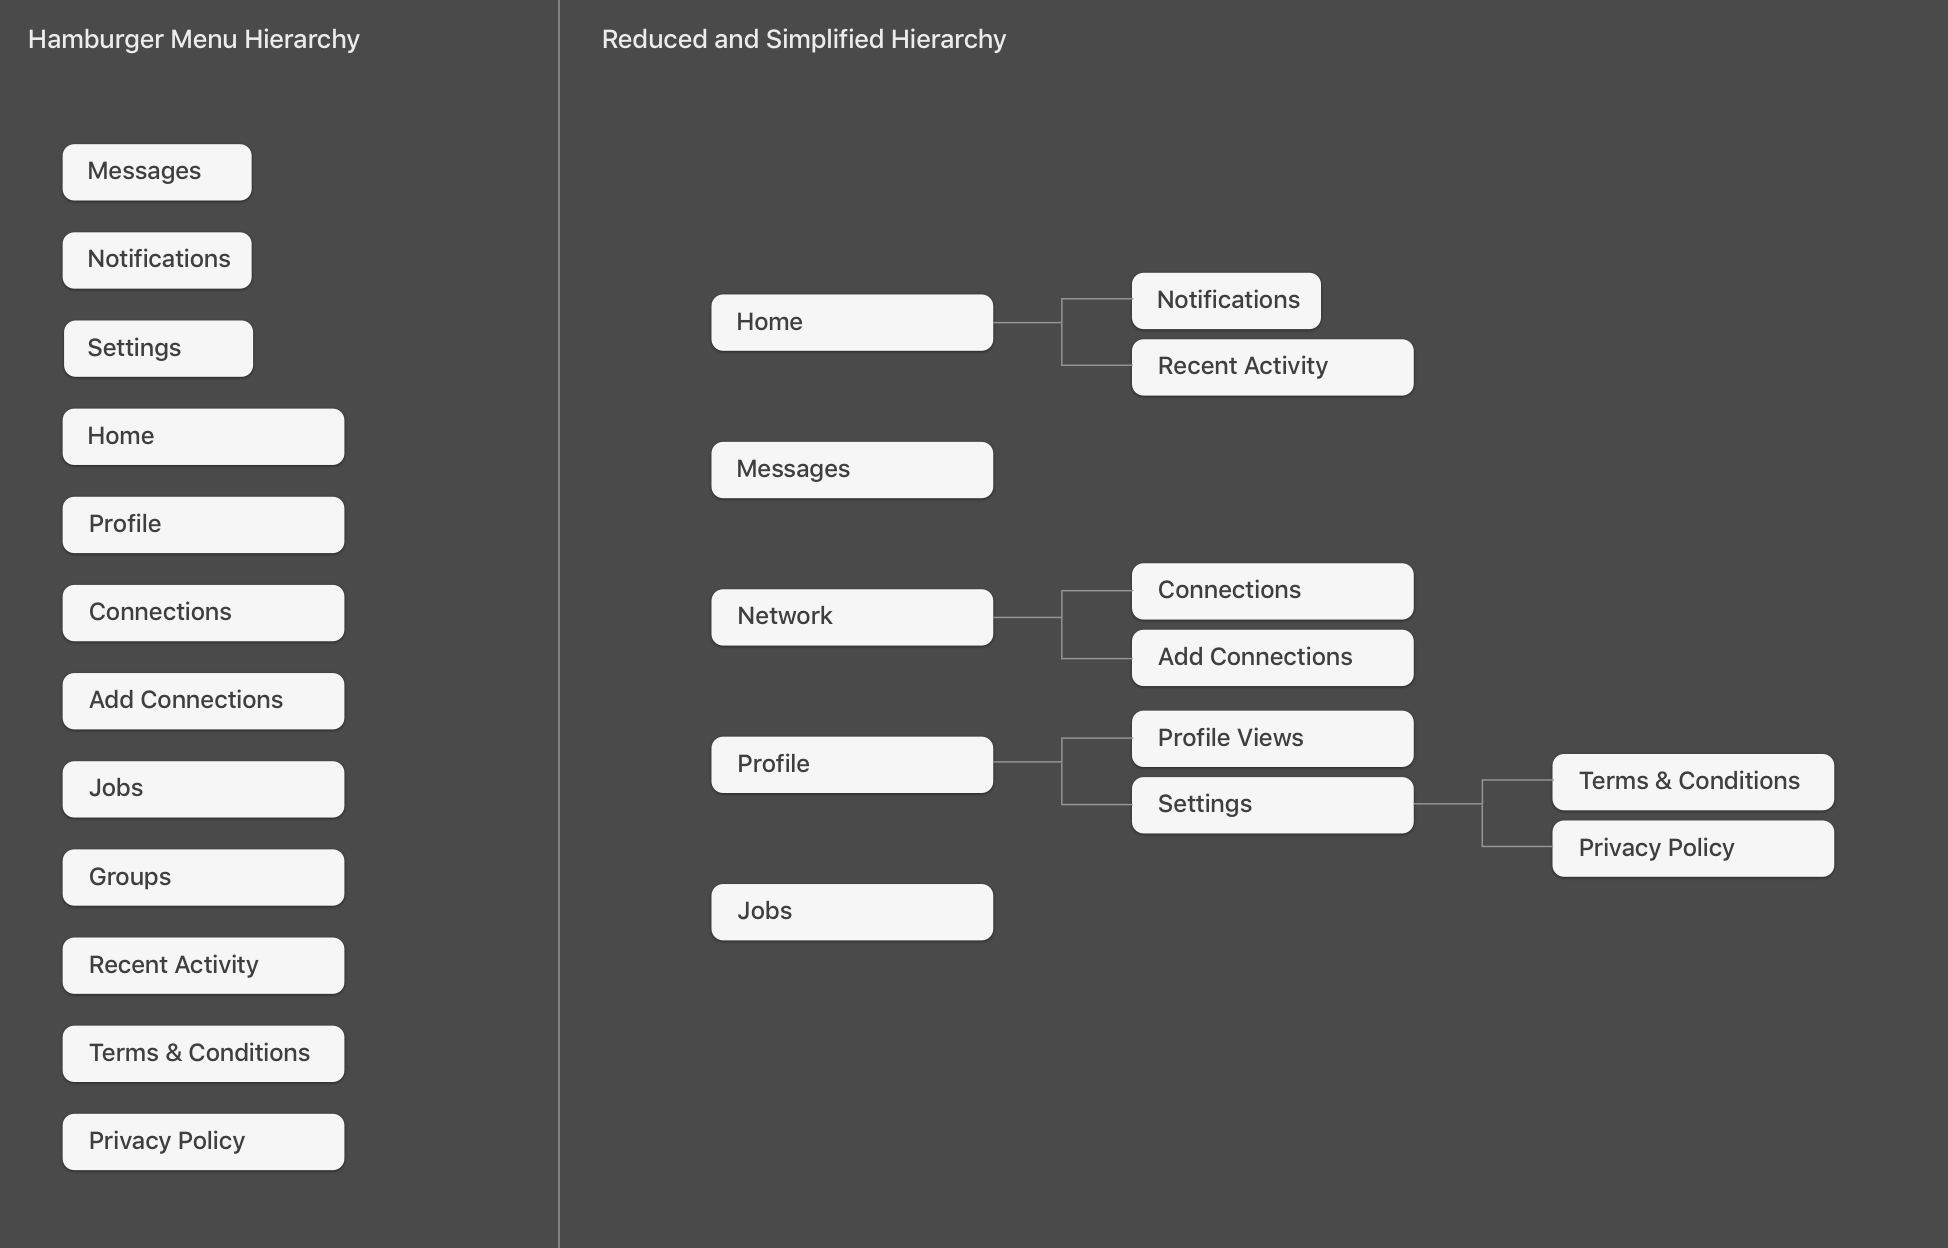 On the left is an example of hamburger menu information architecture and how it defines the features as peers -- that is, all on the same level. In comparison, reducing and reorganizing the information architecture, as shown on the right, puts featu…